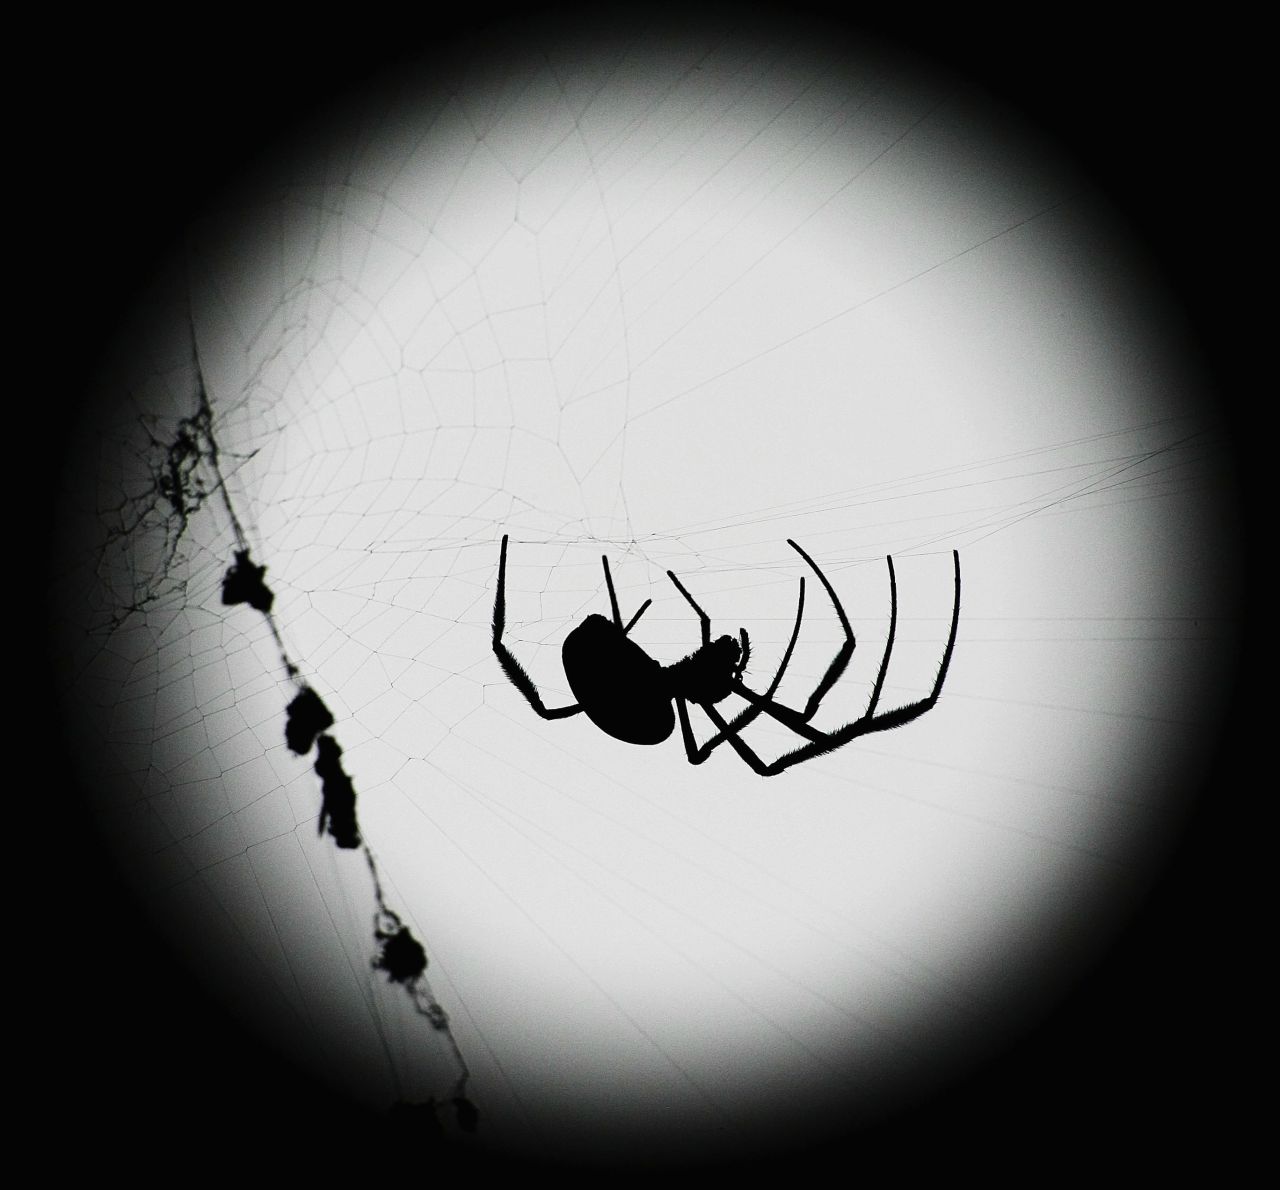 Spiders are also associated with Halloween imagery, thanks in part to their historic association with <a href="http://www.the-wisdom-of-wicca.com/halloween-symbols.html" target="_blank" target="_blank">ancient religions</a>. The myths surrounding gods and supernatural beings who can predict the future or plot fate are often associated with spinning, thread, weaving and spider webs. But after all, spiders can be scary -- some bite! -- and spooky imagery is part of the Halloween tradition.